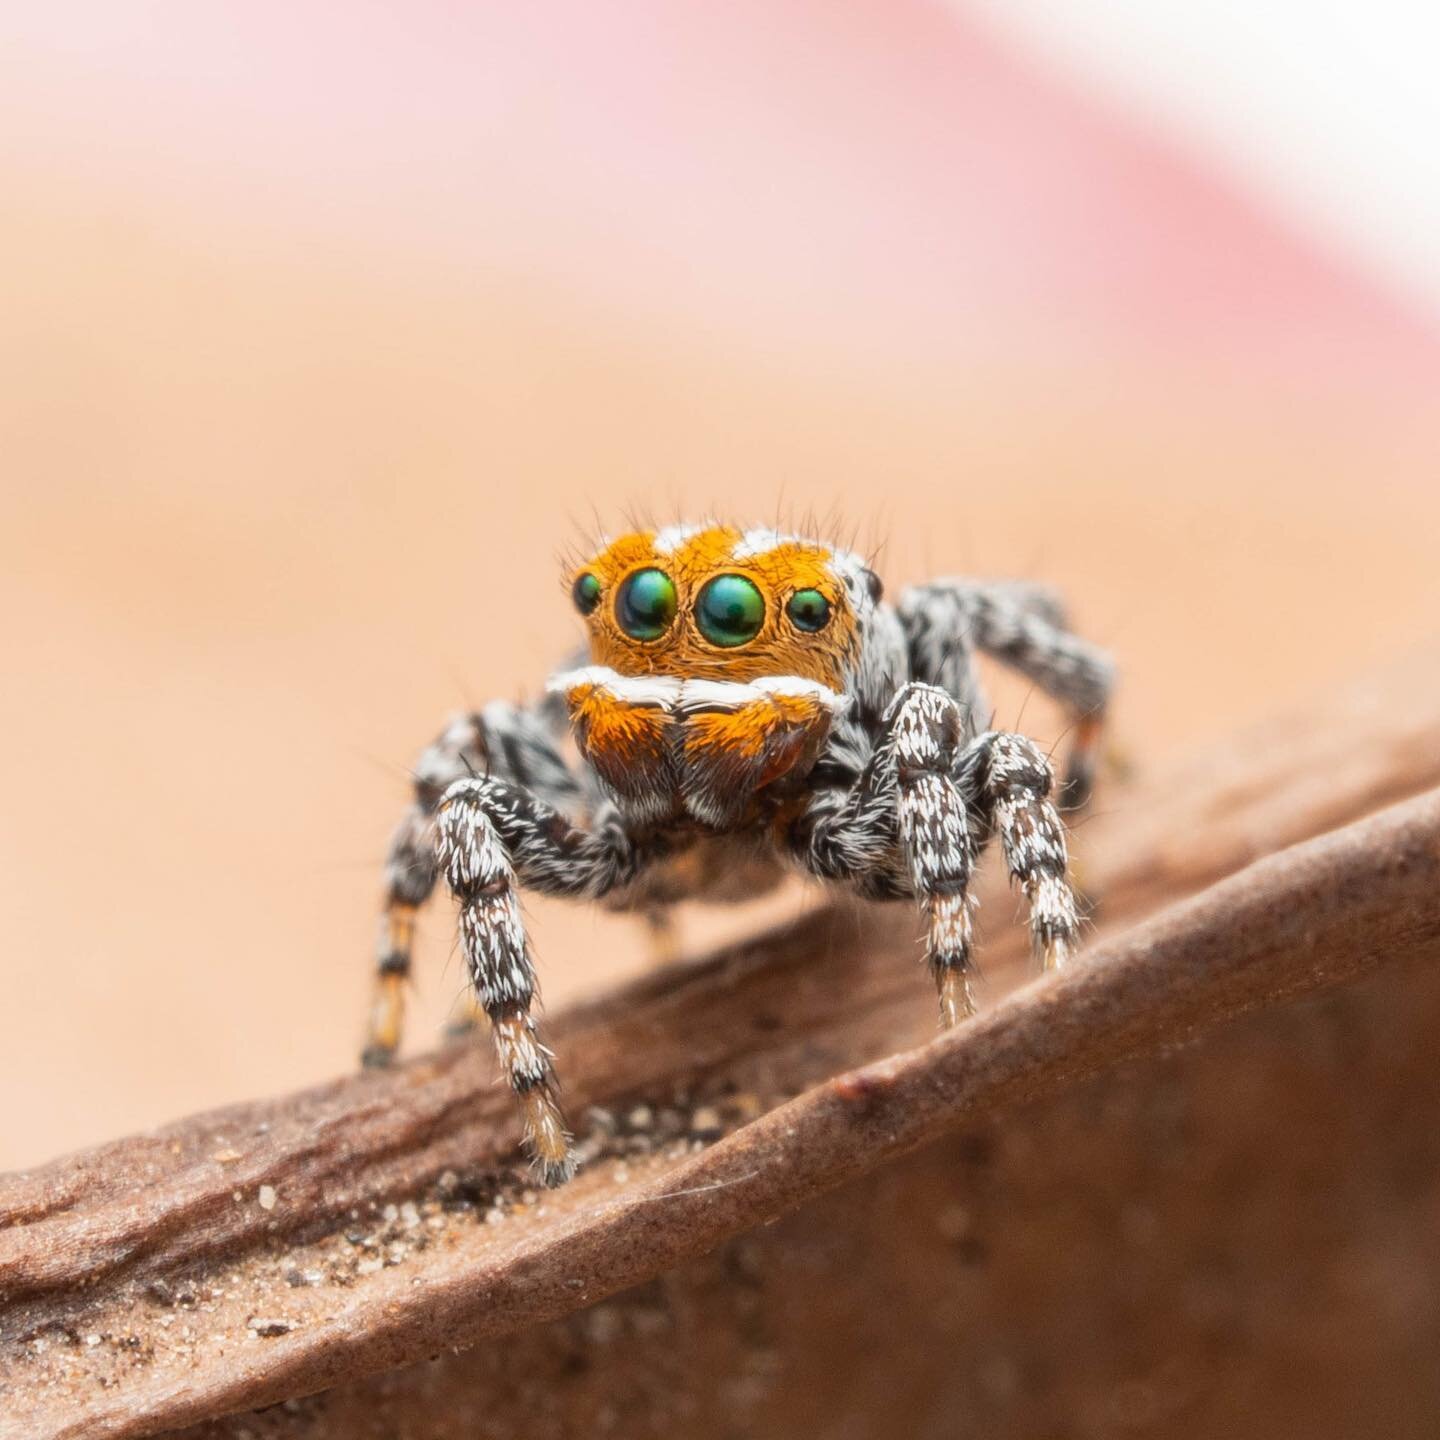 Say hello to Nemo. No bigger than a grain of rice, Nemo is an adorable new dancing peacock spider discovered just outside Mt Gambier, in South Australia. I got to write about him during my latest assignment for @NatGeo.

The peacock spider's colourfu